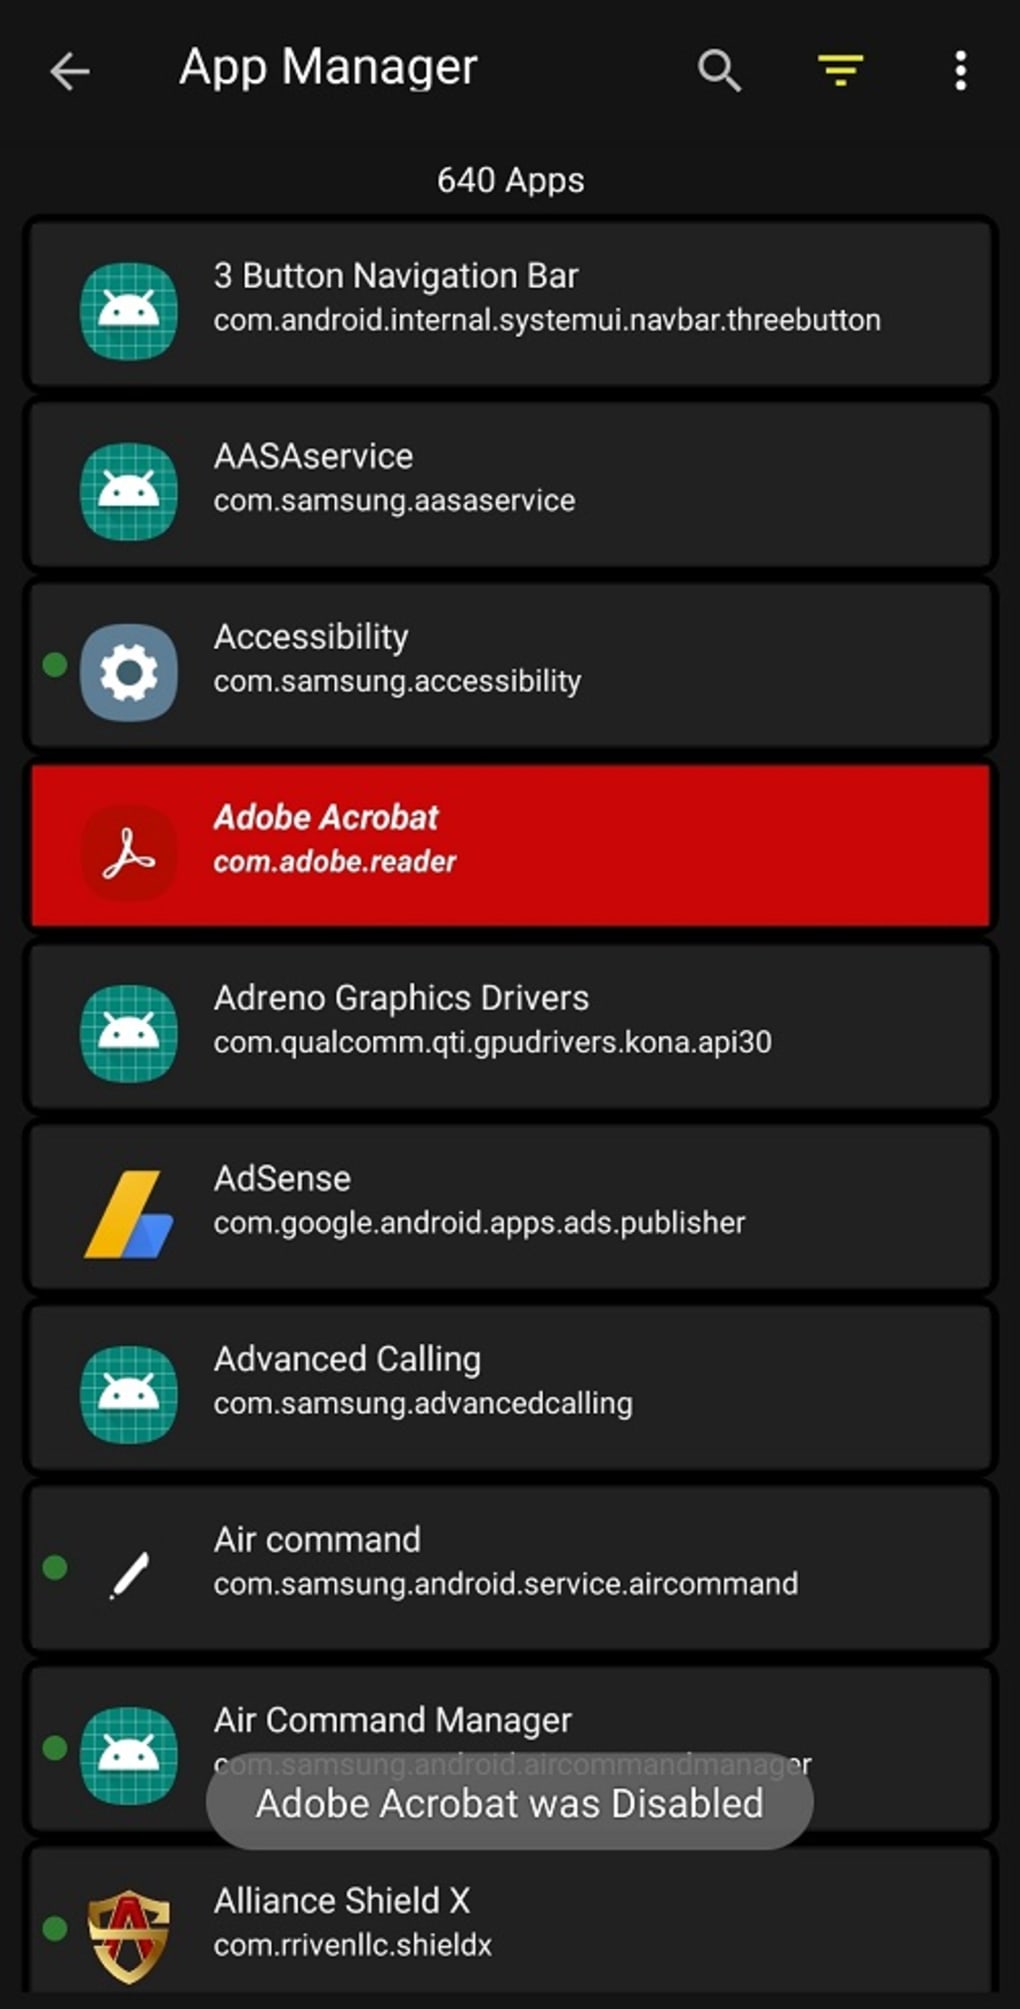 Alliance Shield X Account How To Create & How To Backup Apps